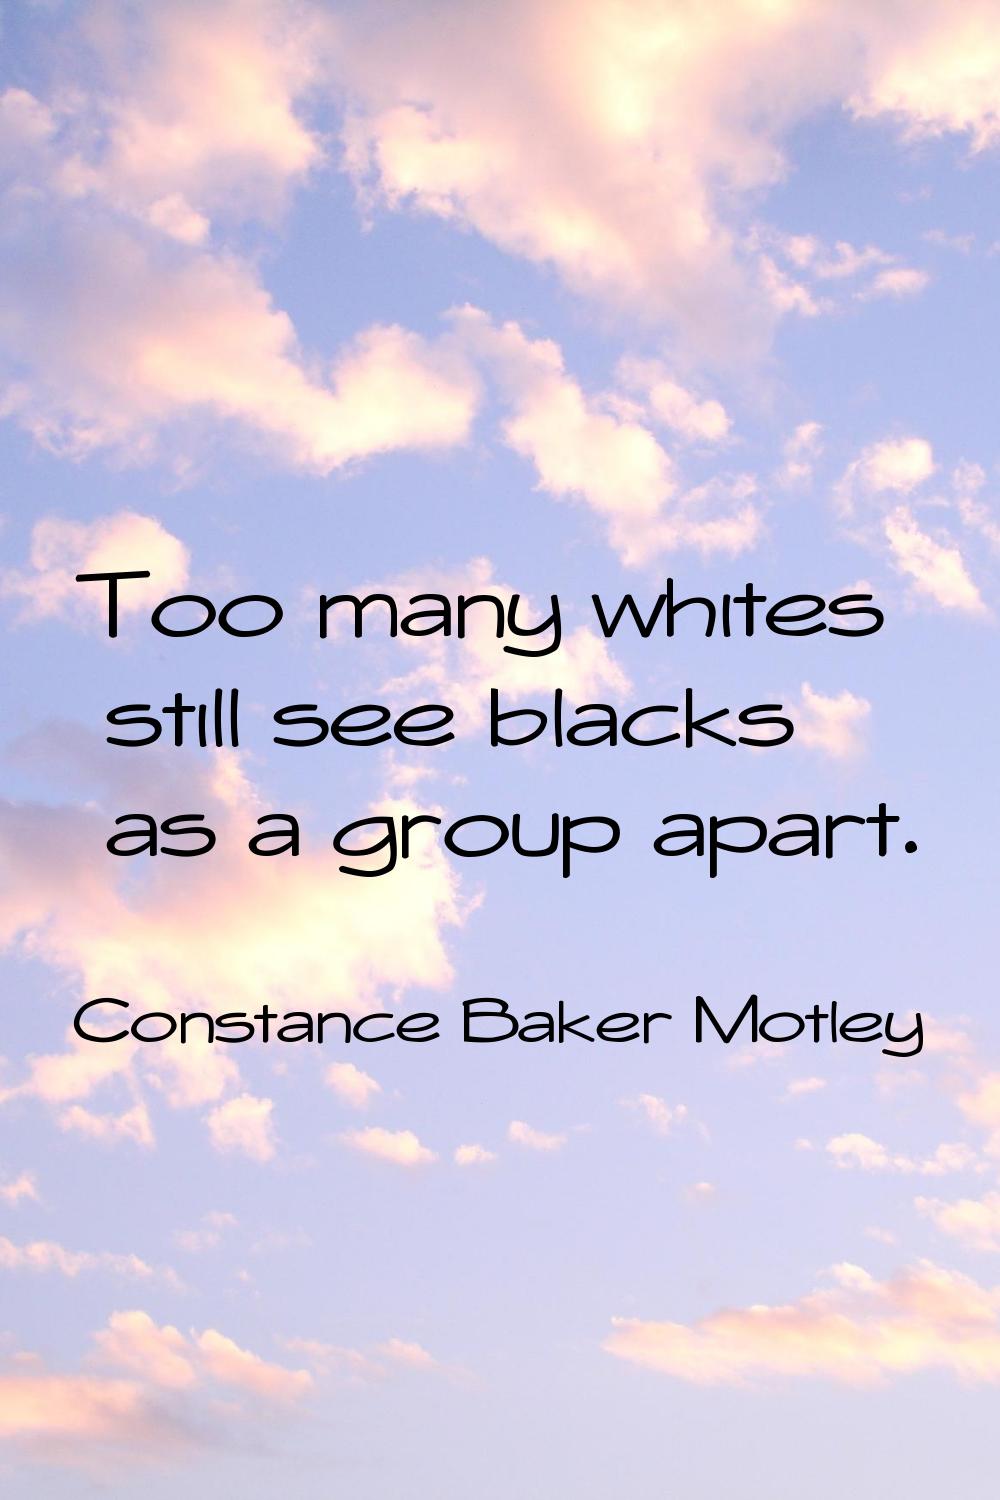 Too many whites still see blacks as a group apart.